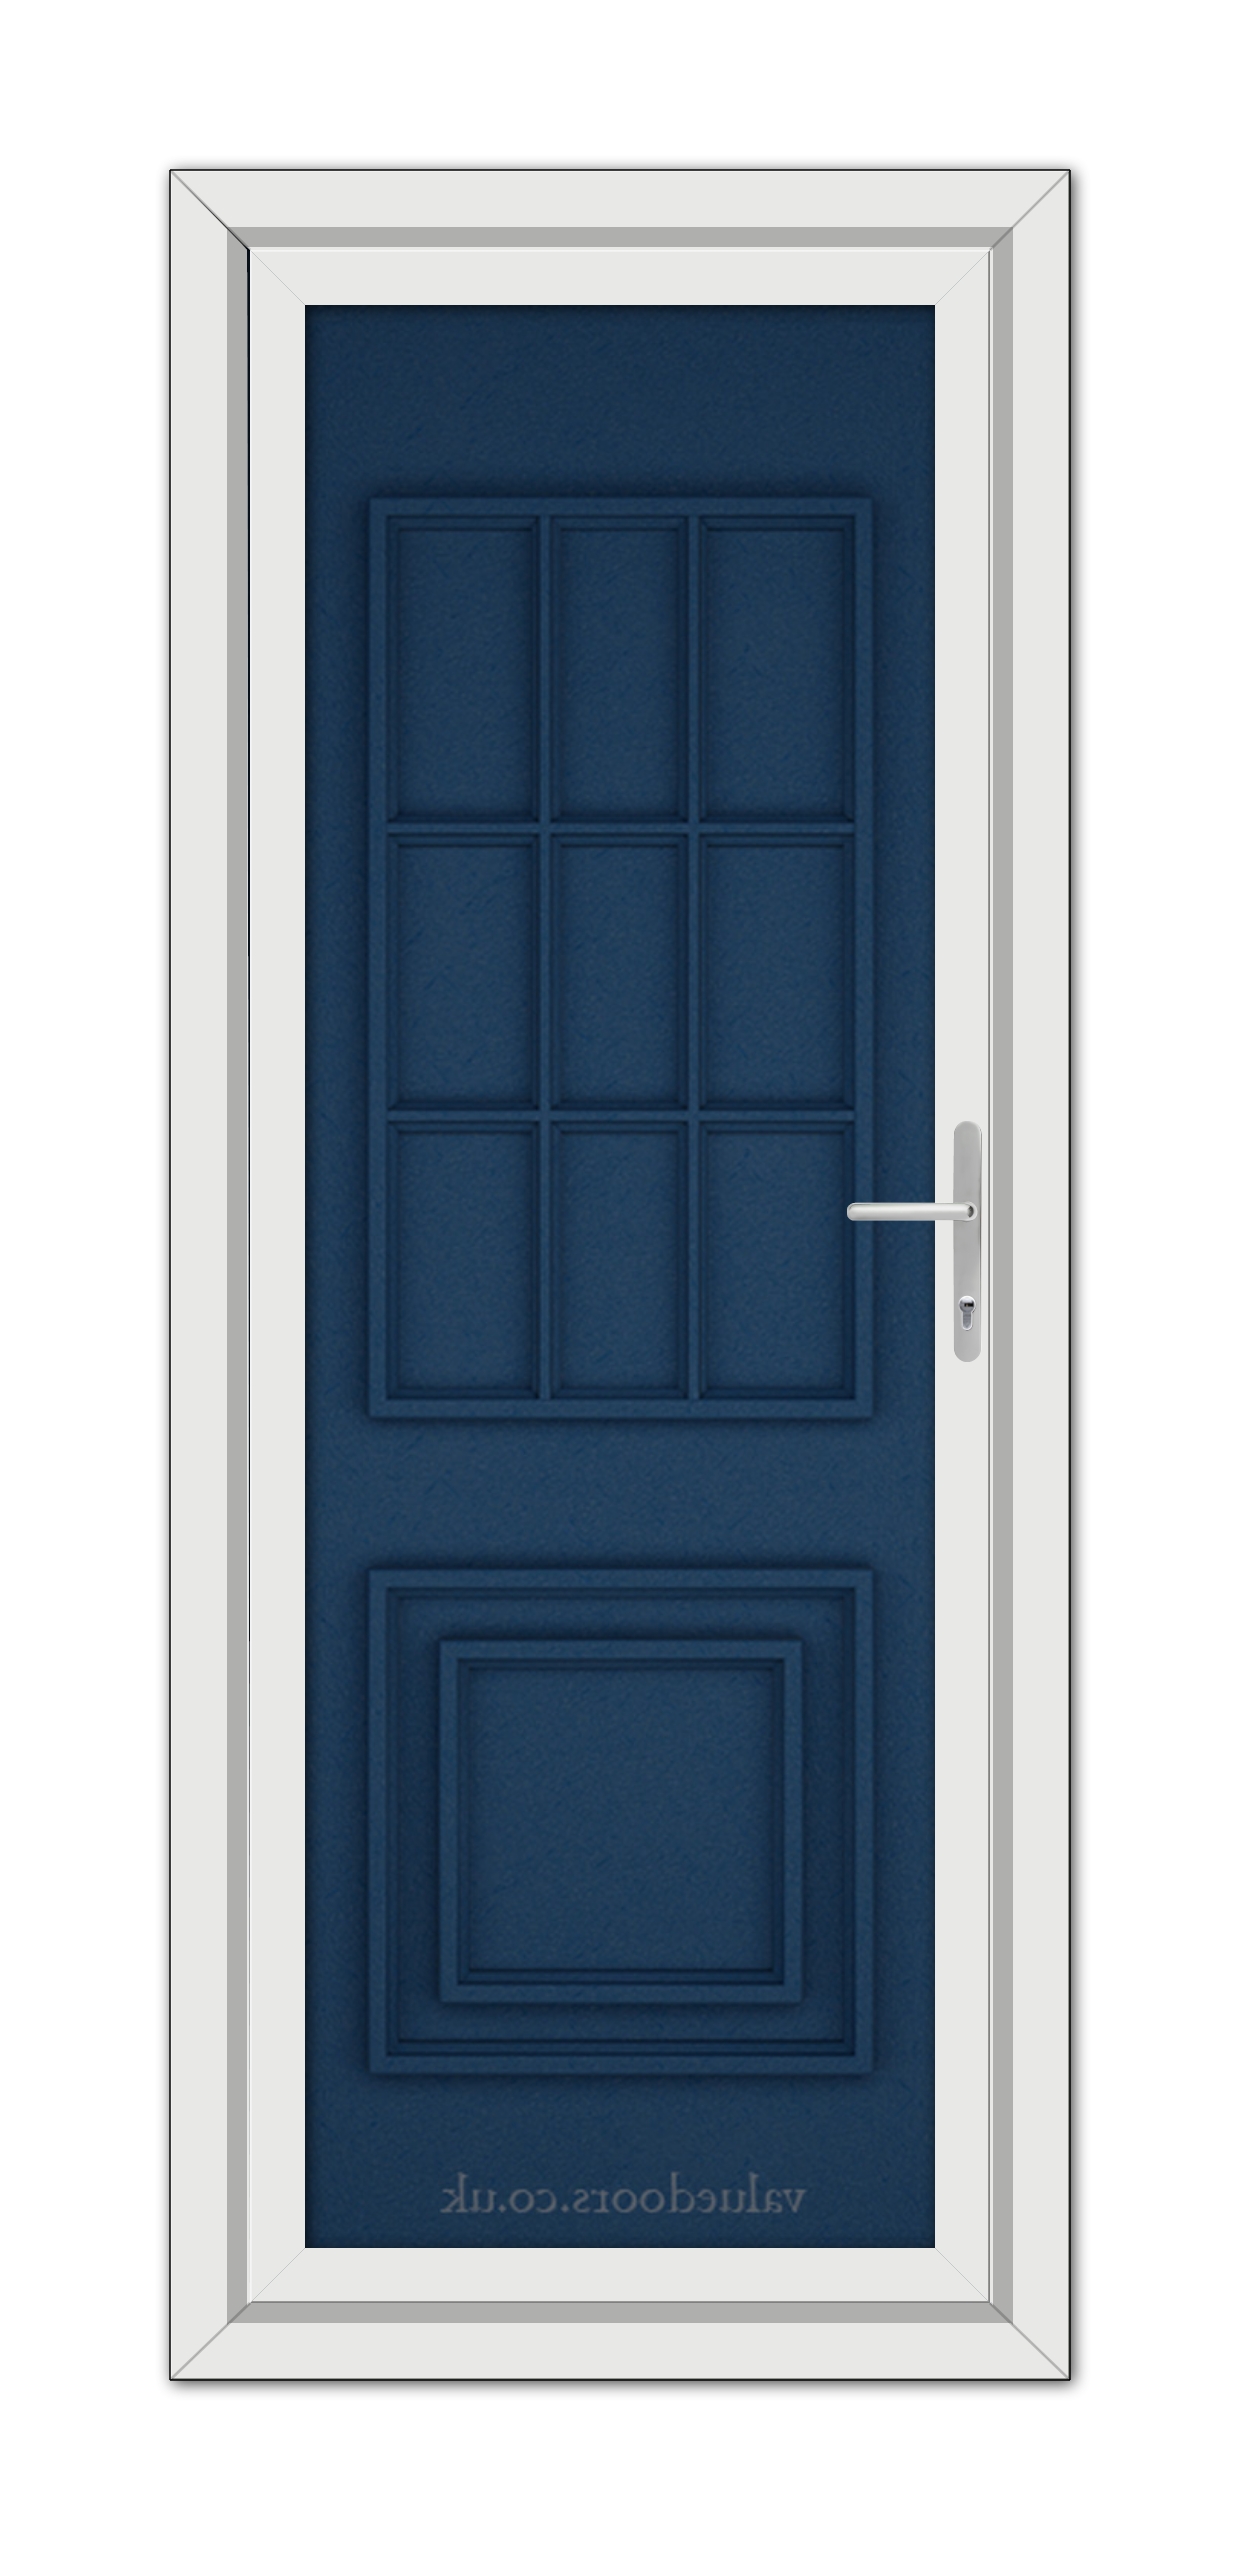 A vertical image of a closed Blue Cambridge One Solid uPVC Door with a white frame and a silver handle on the right side.